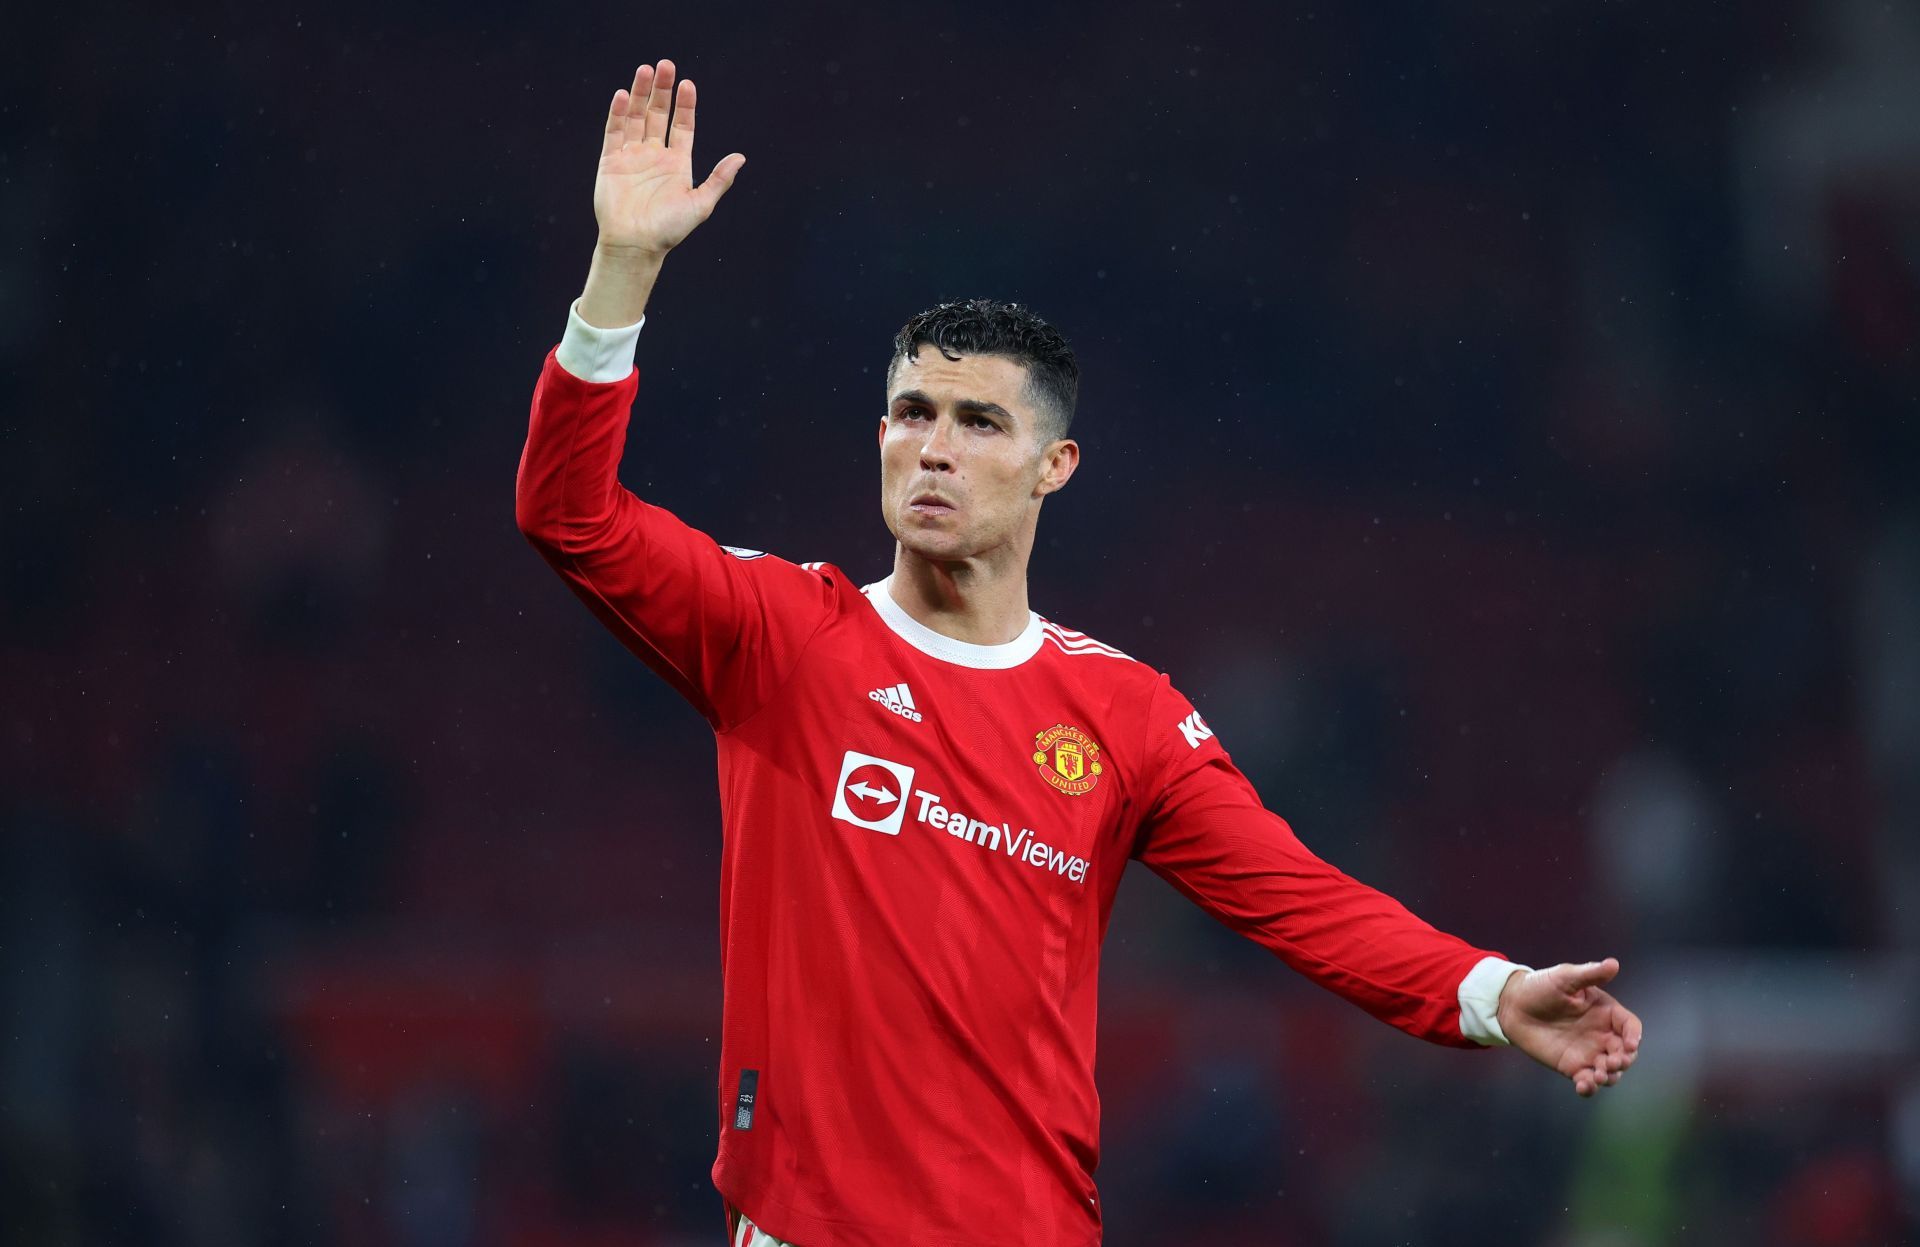 Red Devils superstar Cristiano Ronaldo reacts against Brentford